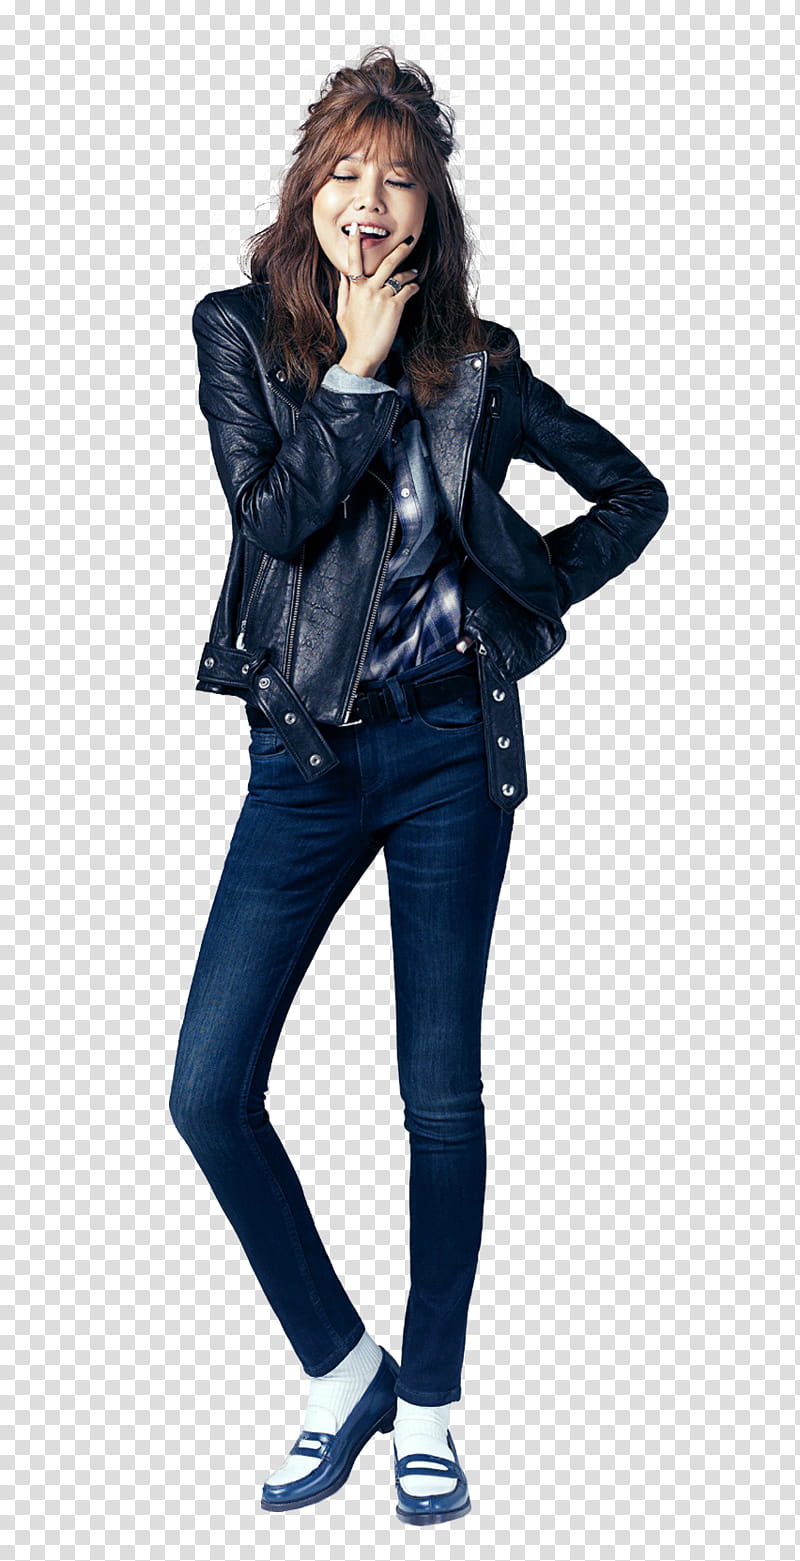 Sooyoung SNSD Render transparent background PNG clipart